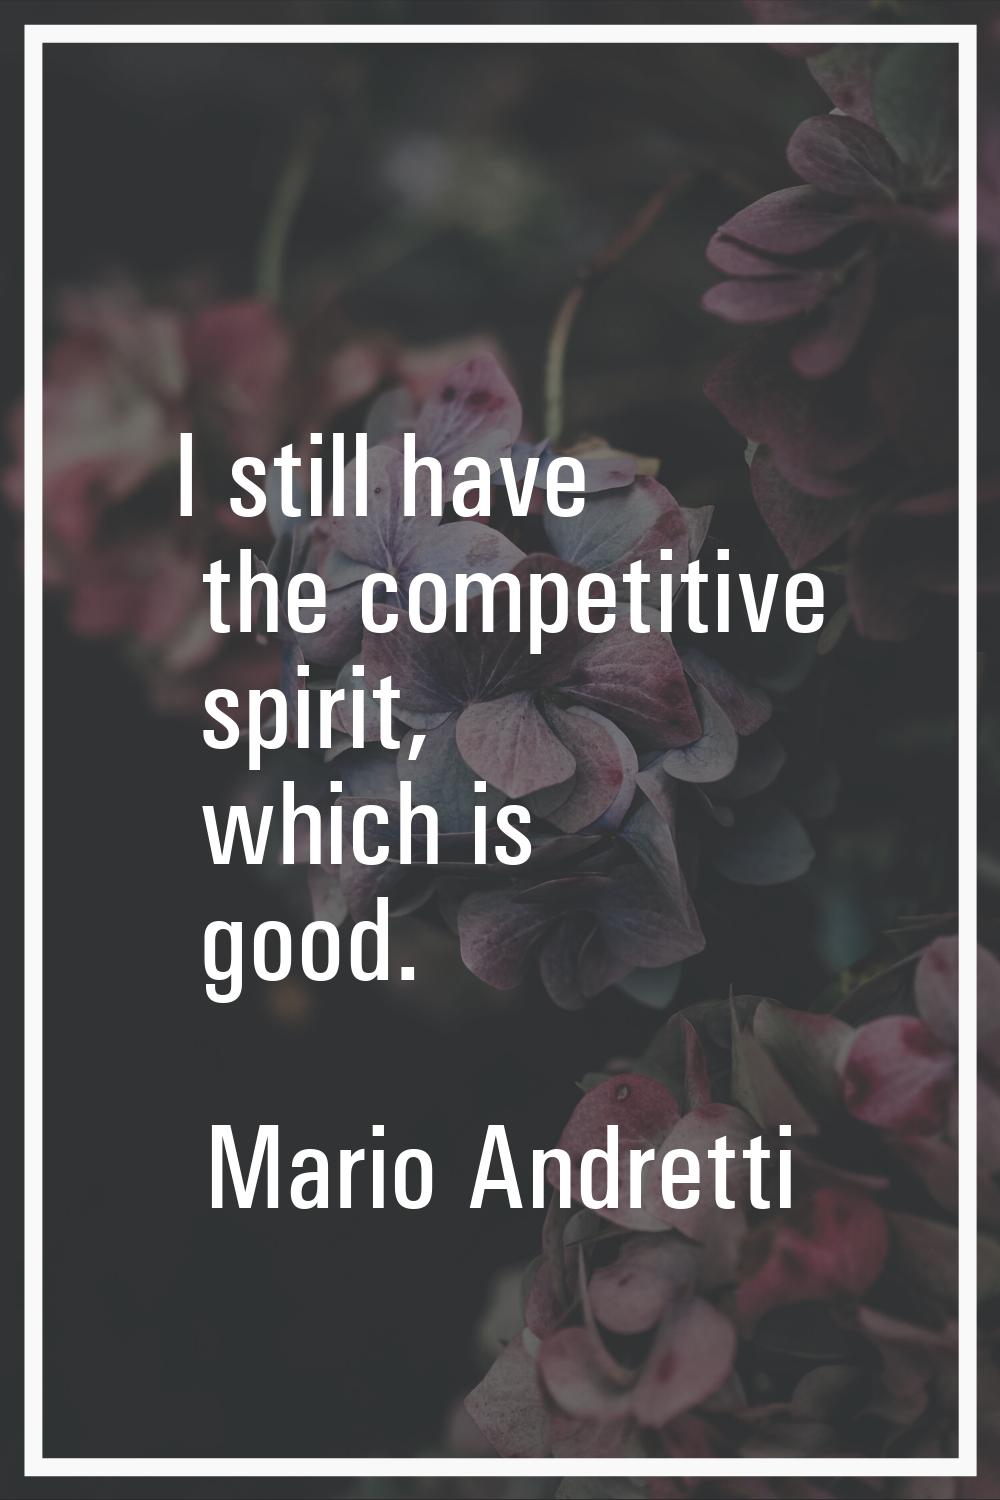 I still have the competitive spirit, which is good.